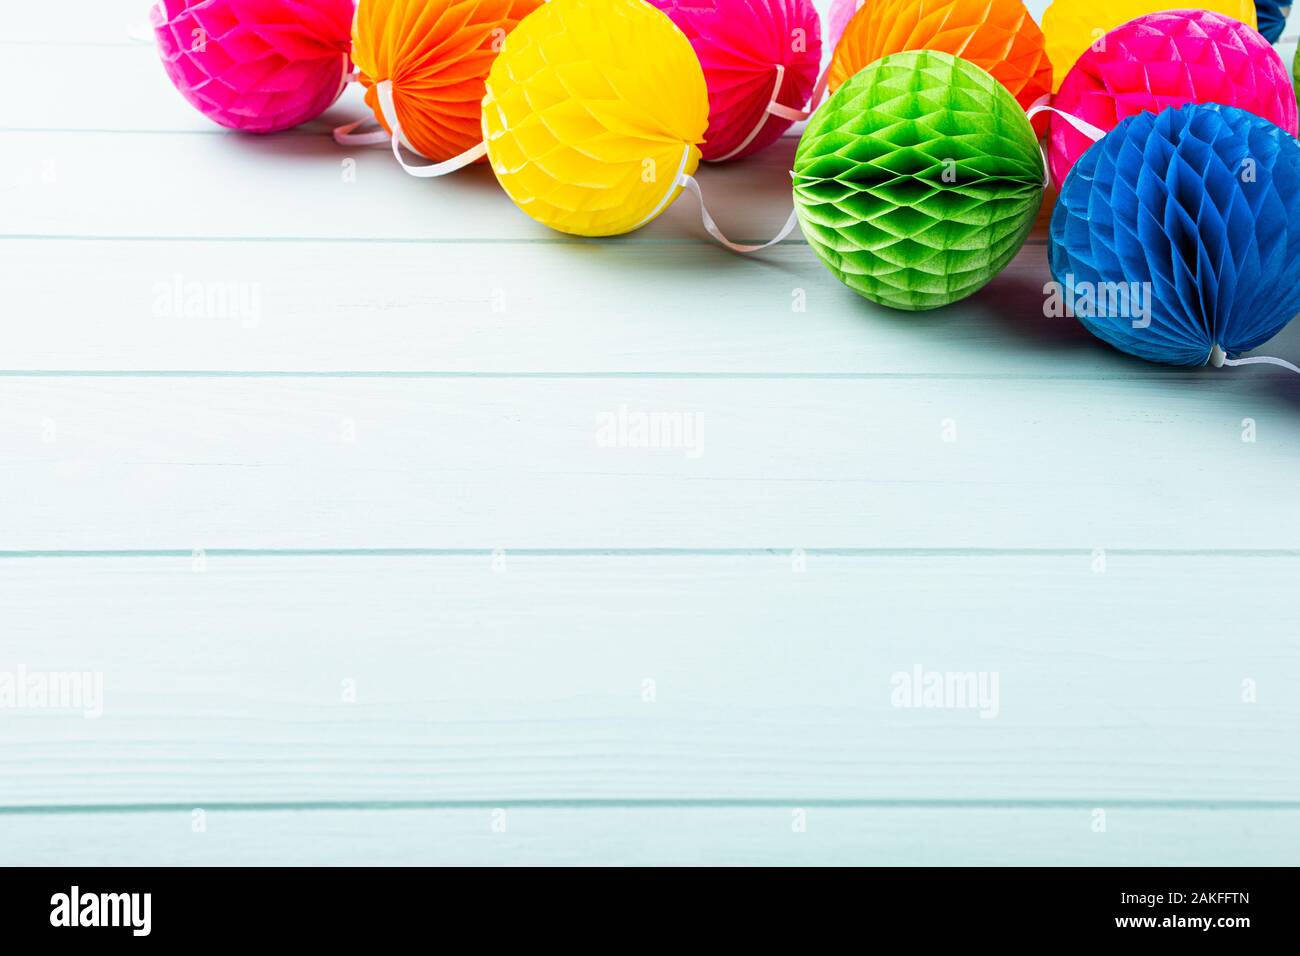 Festive background with colorful paper balls. Stock Photo